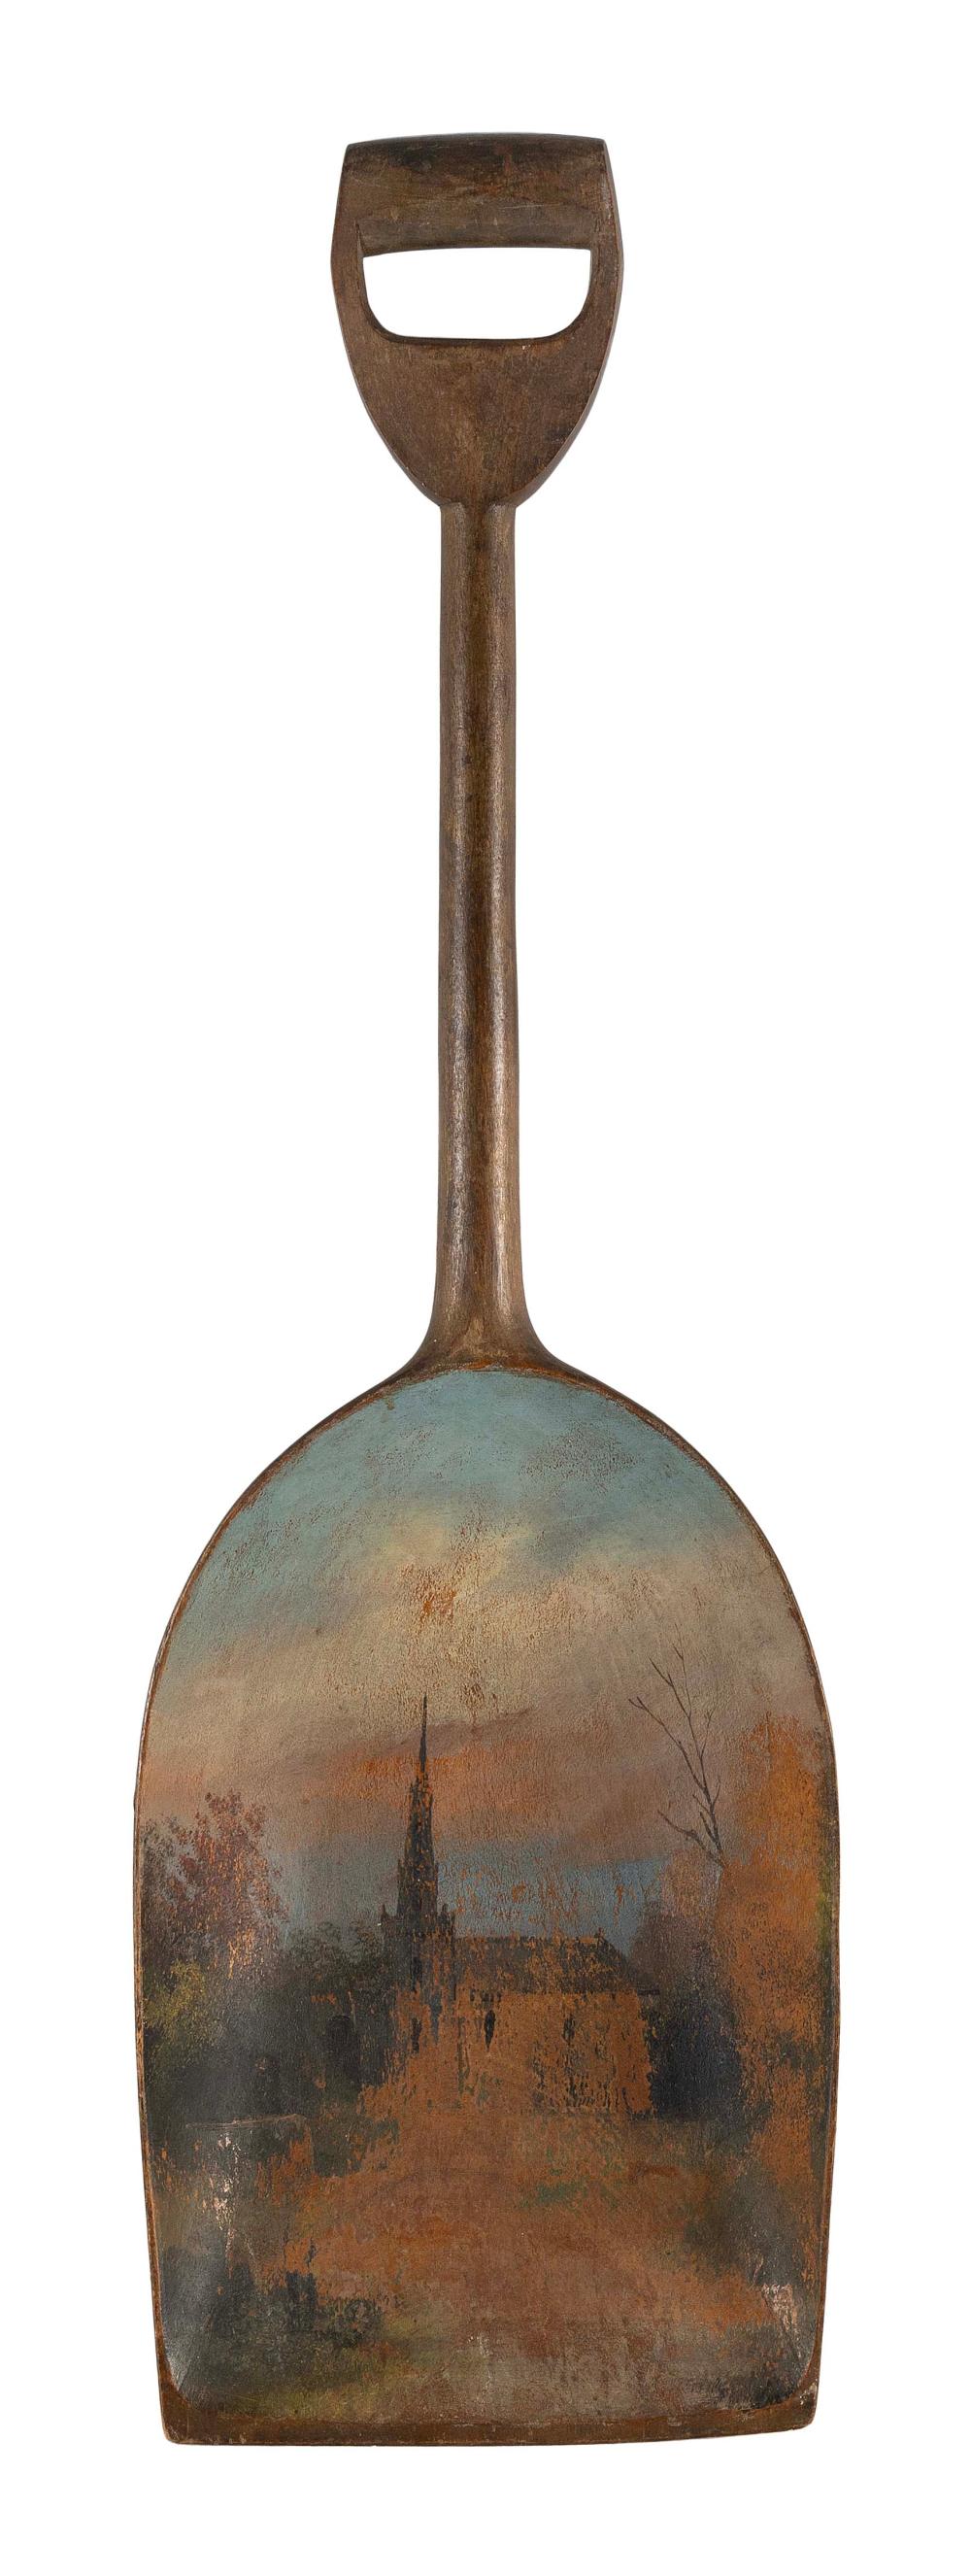 EARLY HAND-HEWN GRAIN SHOVEL SECOND